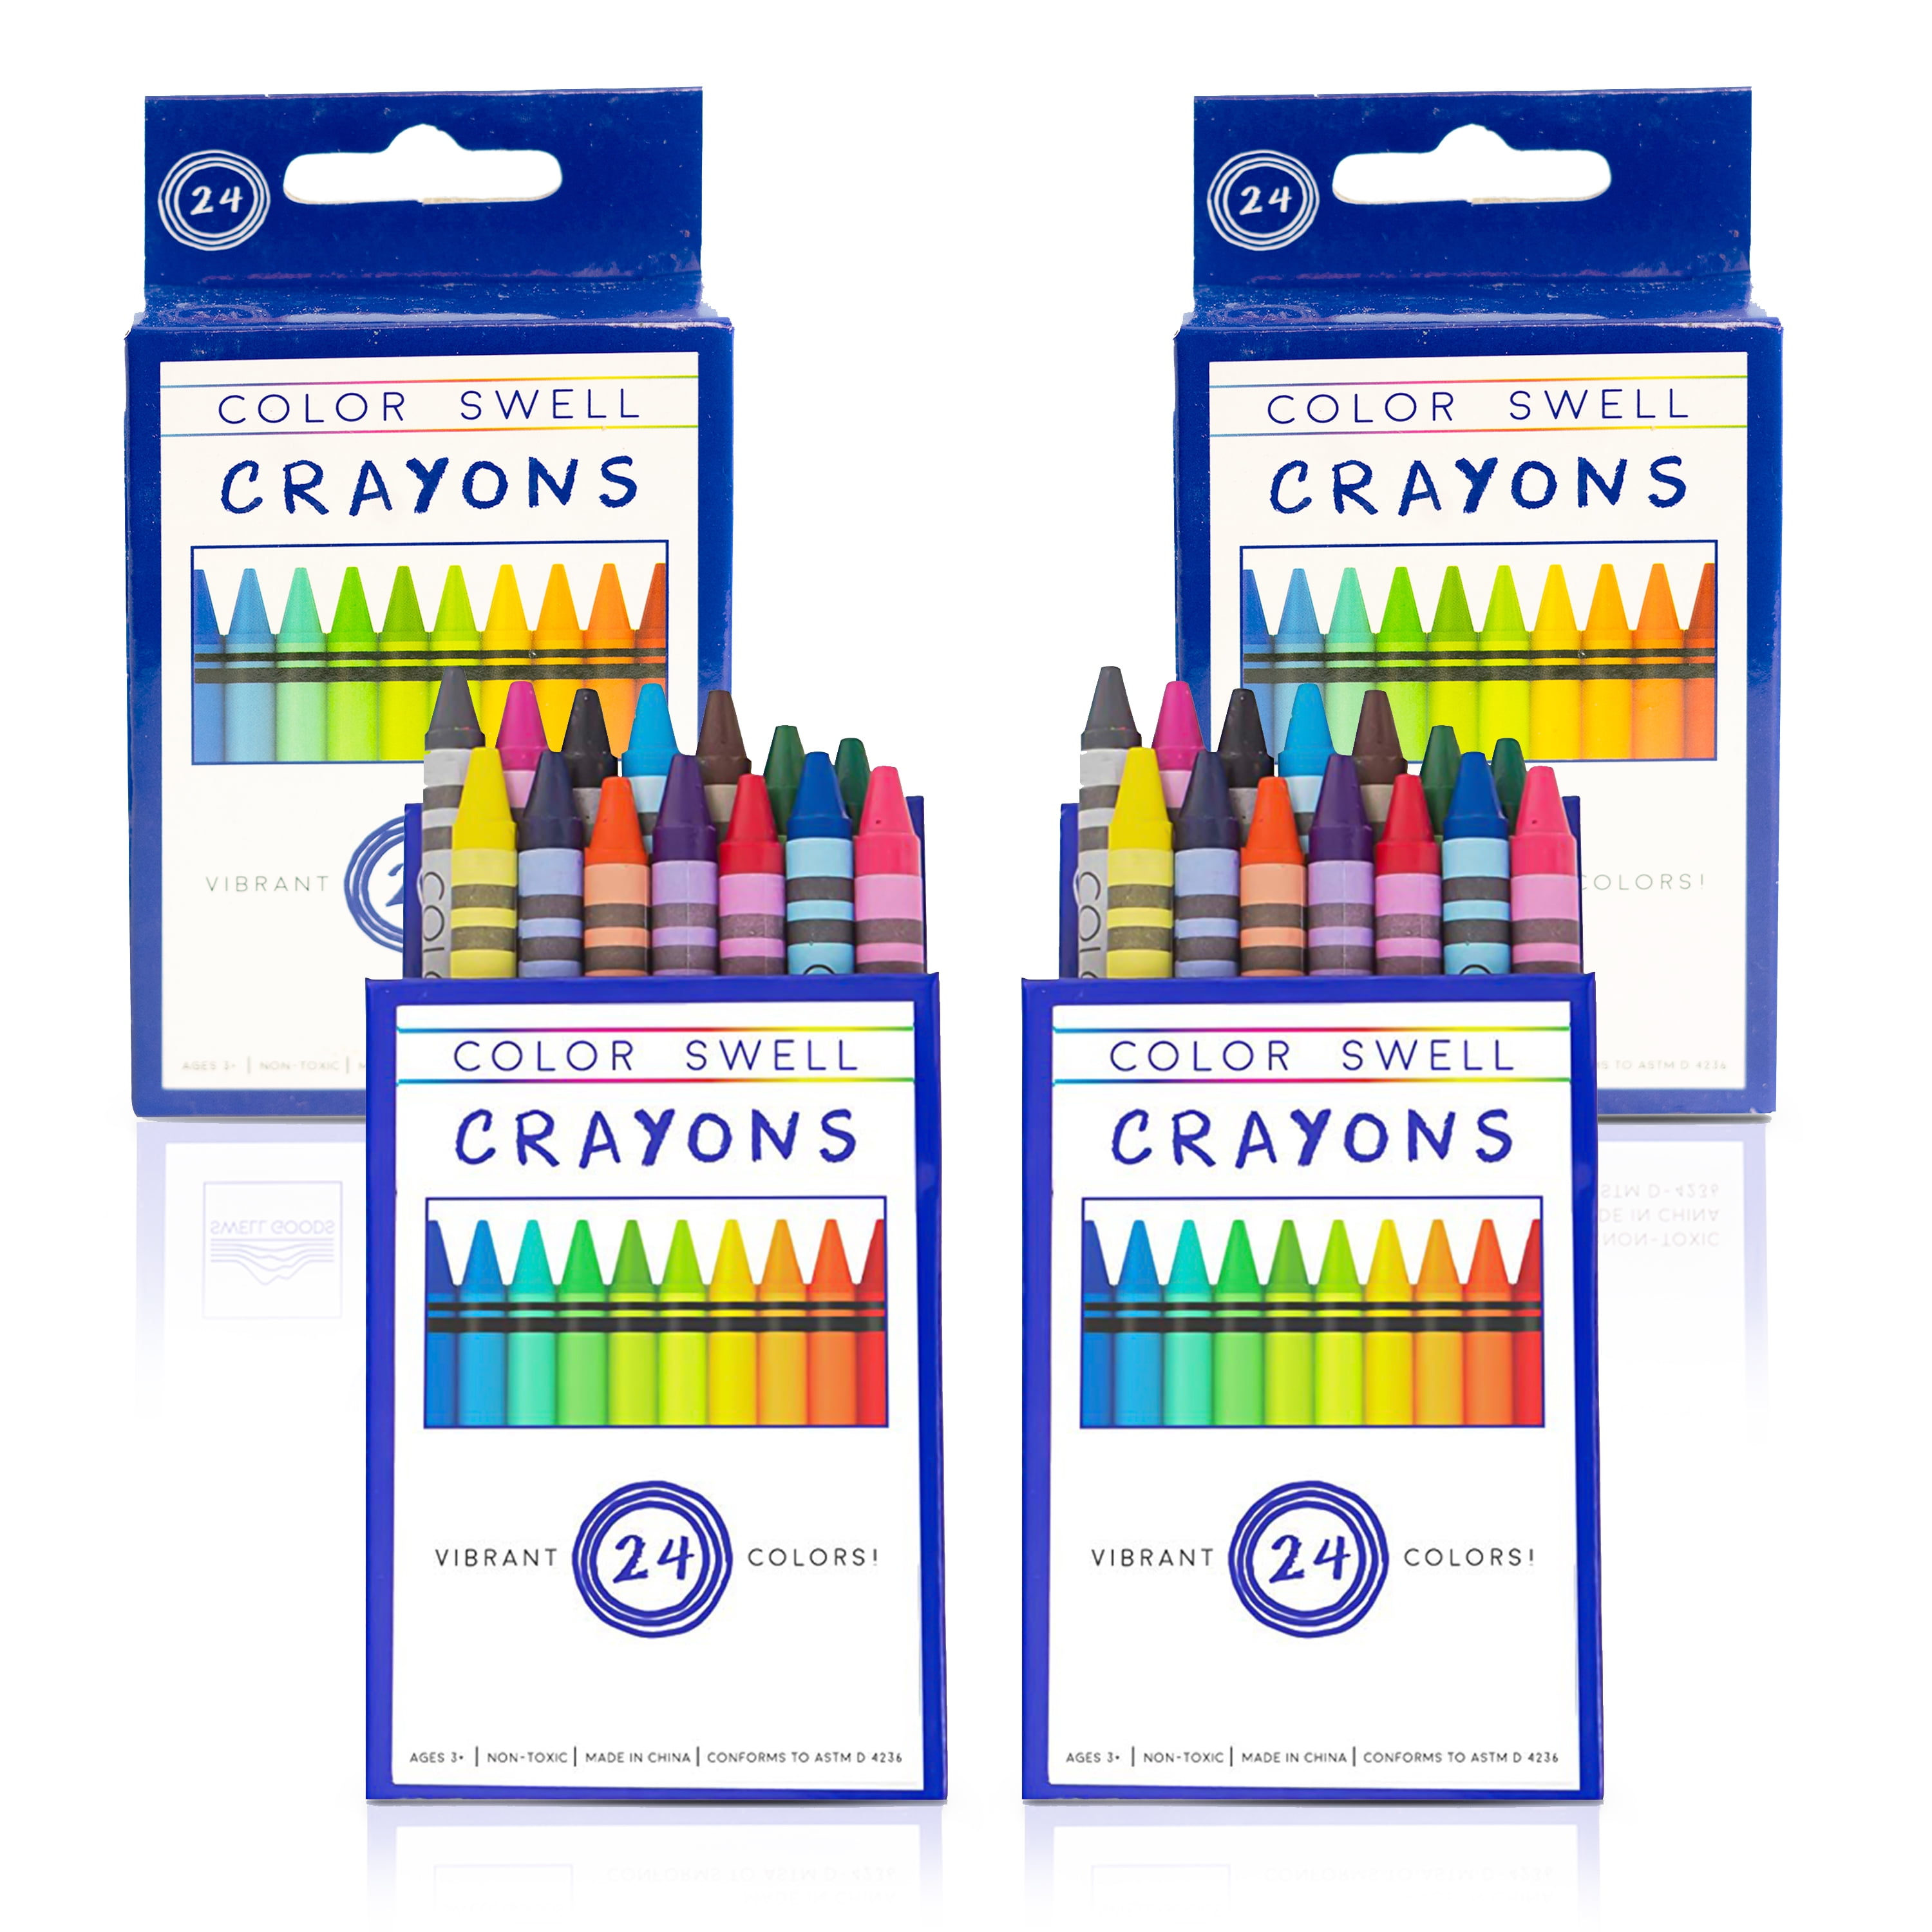  Color Swell Bulk Crayon Packs - 36 Boxes of 24 Vibrant Colored  Durable Bulk Crayons of Teacher Quality for Classroom and Home : Toys &  Games